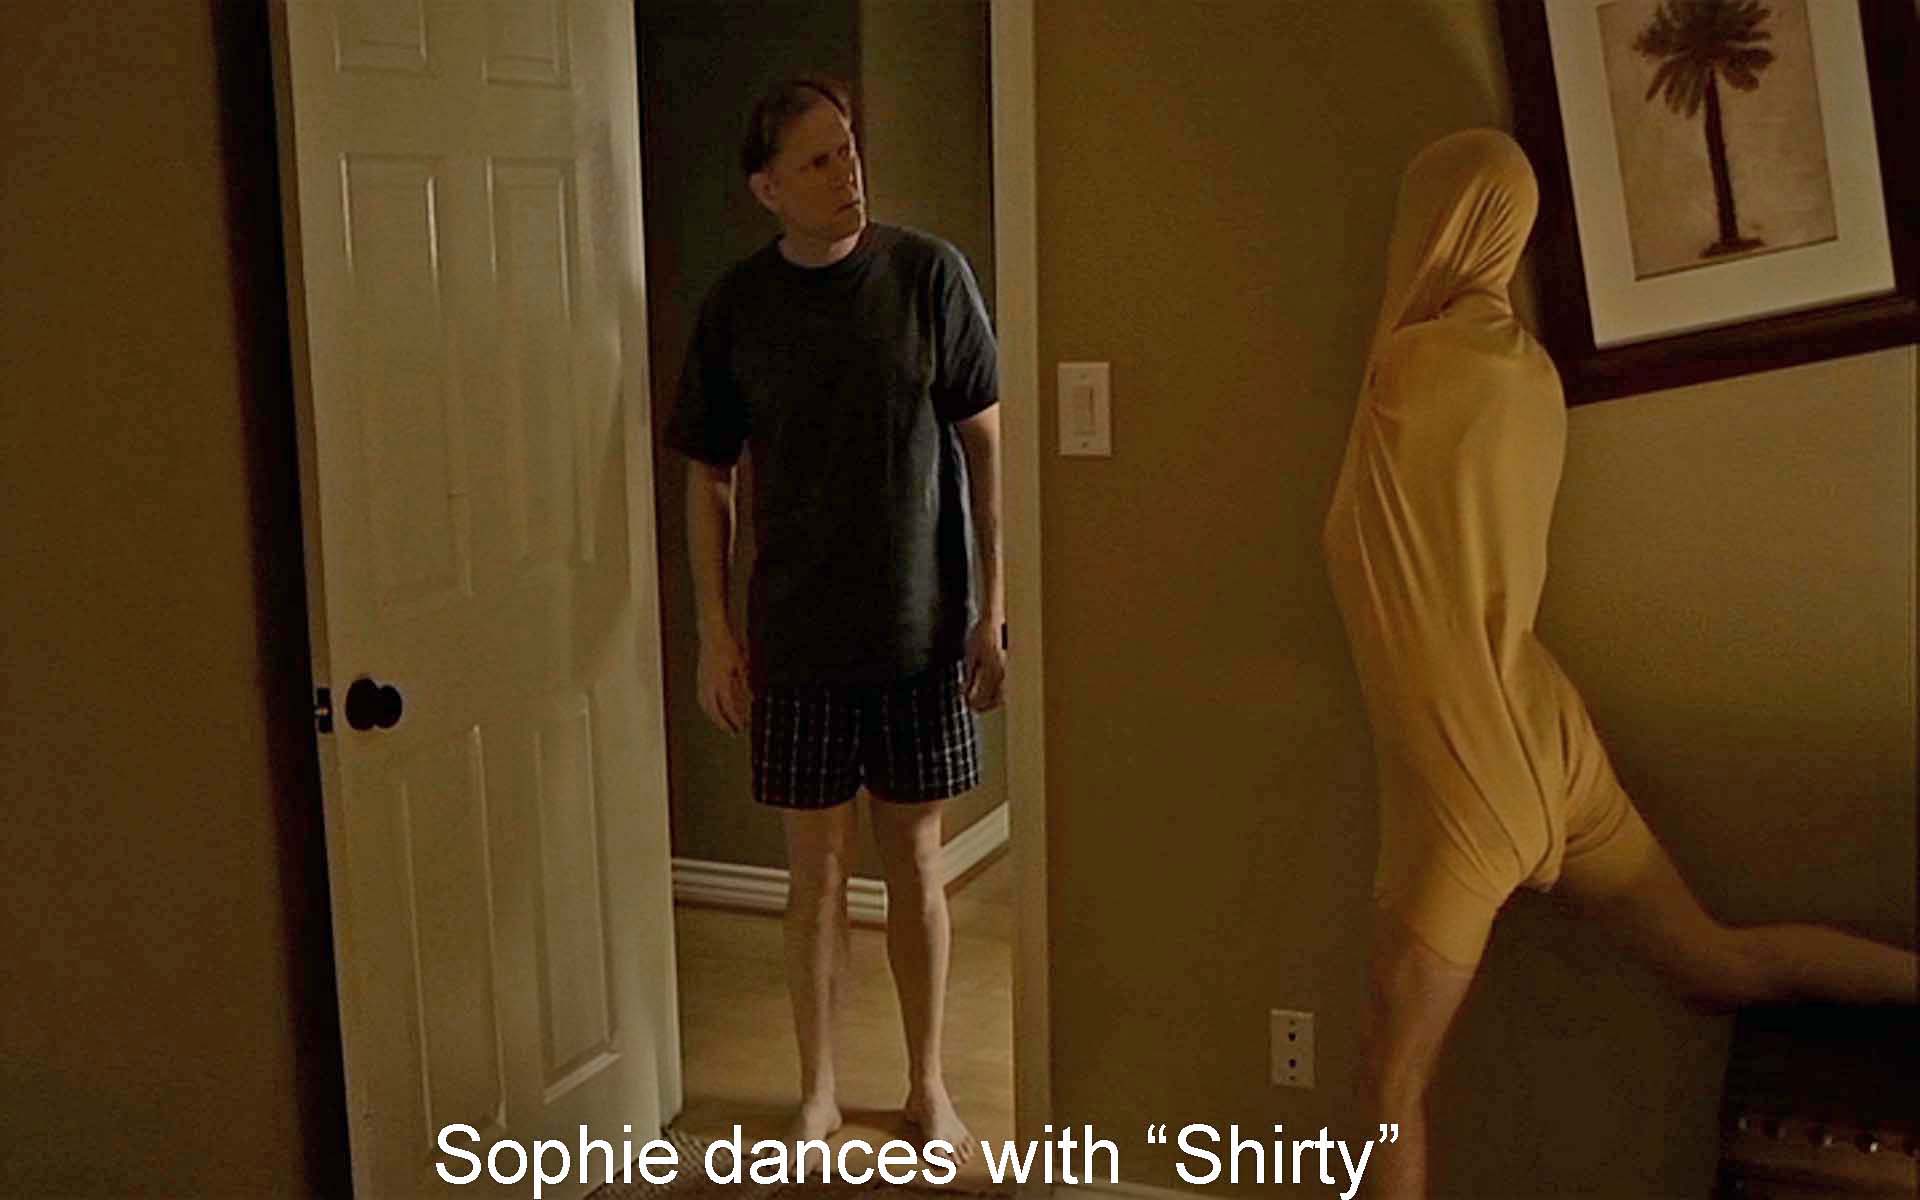 Sophie dances with  “Shirty,”